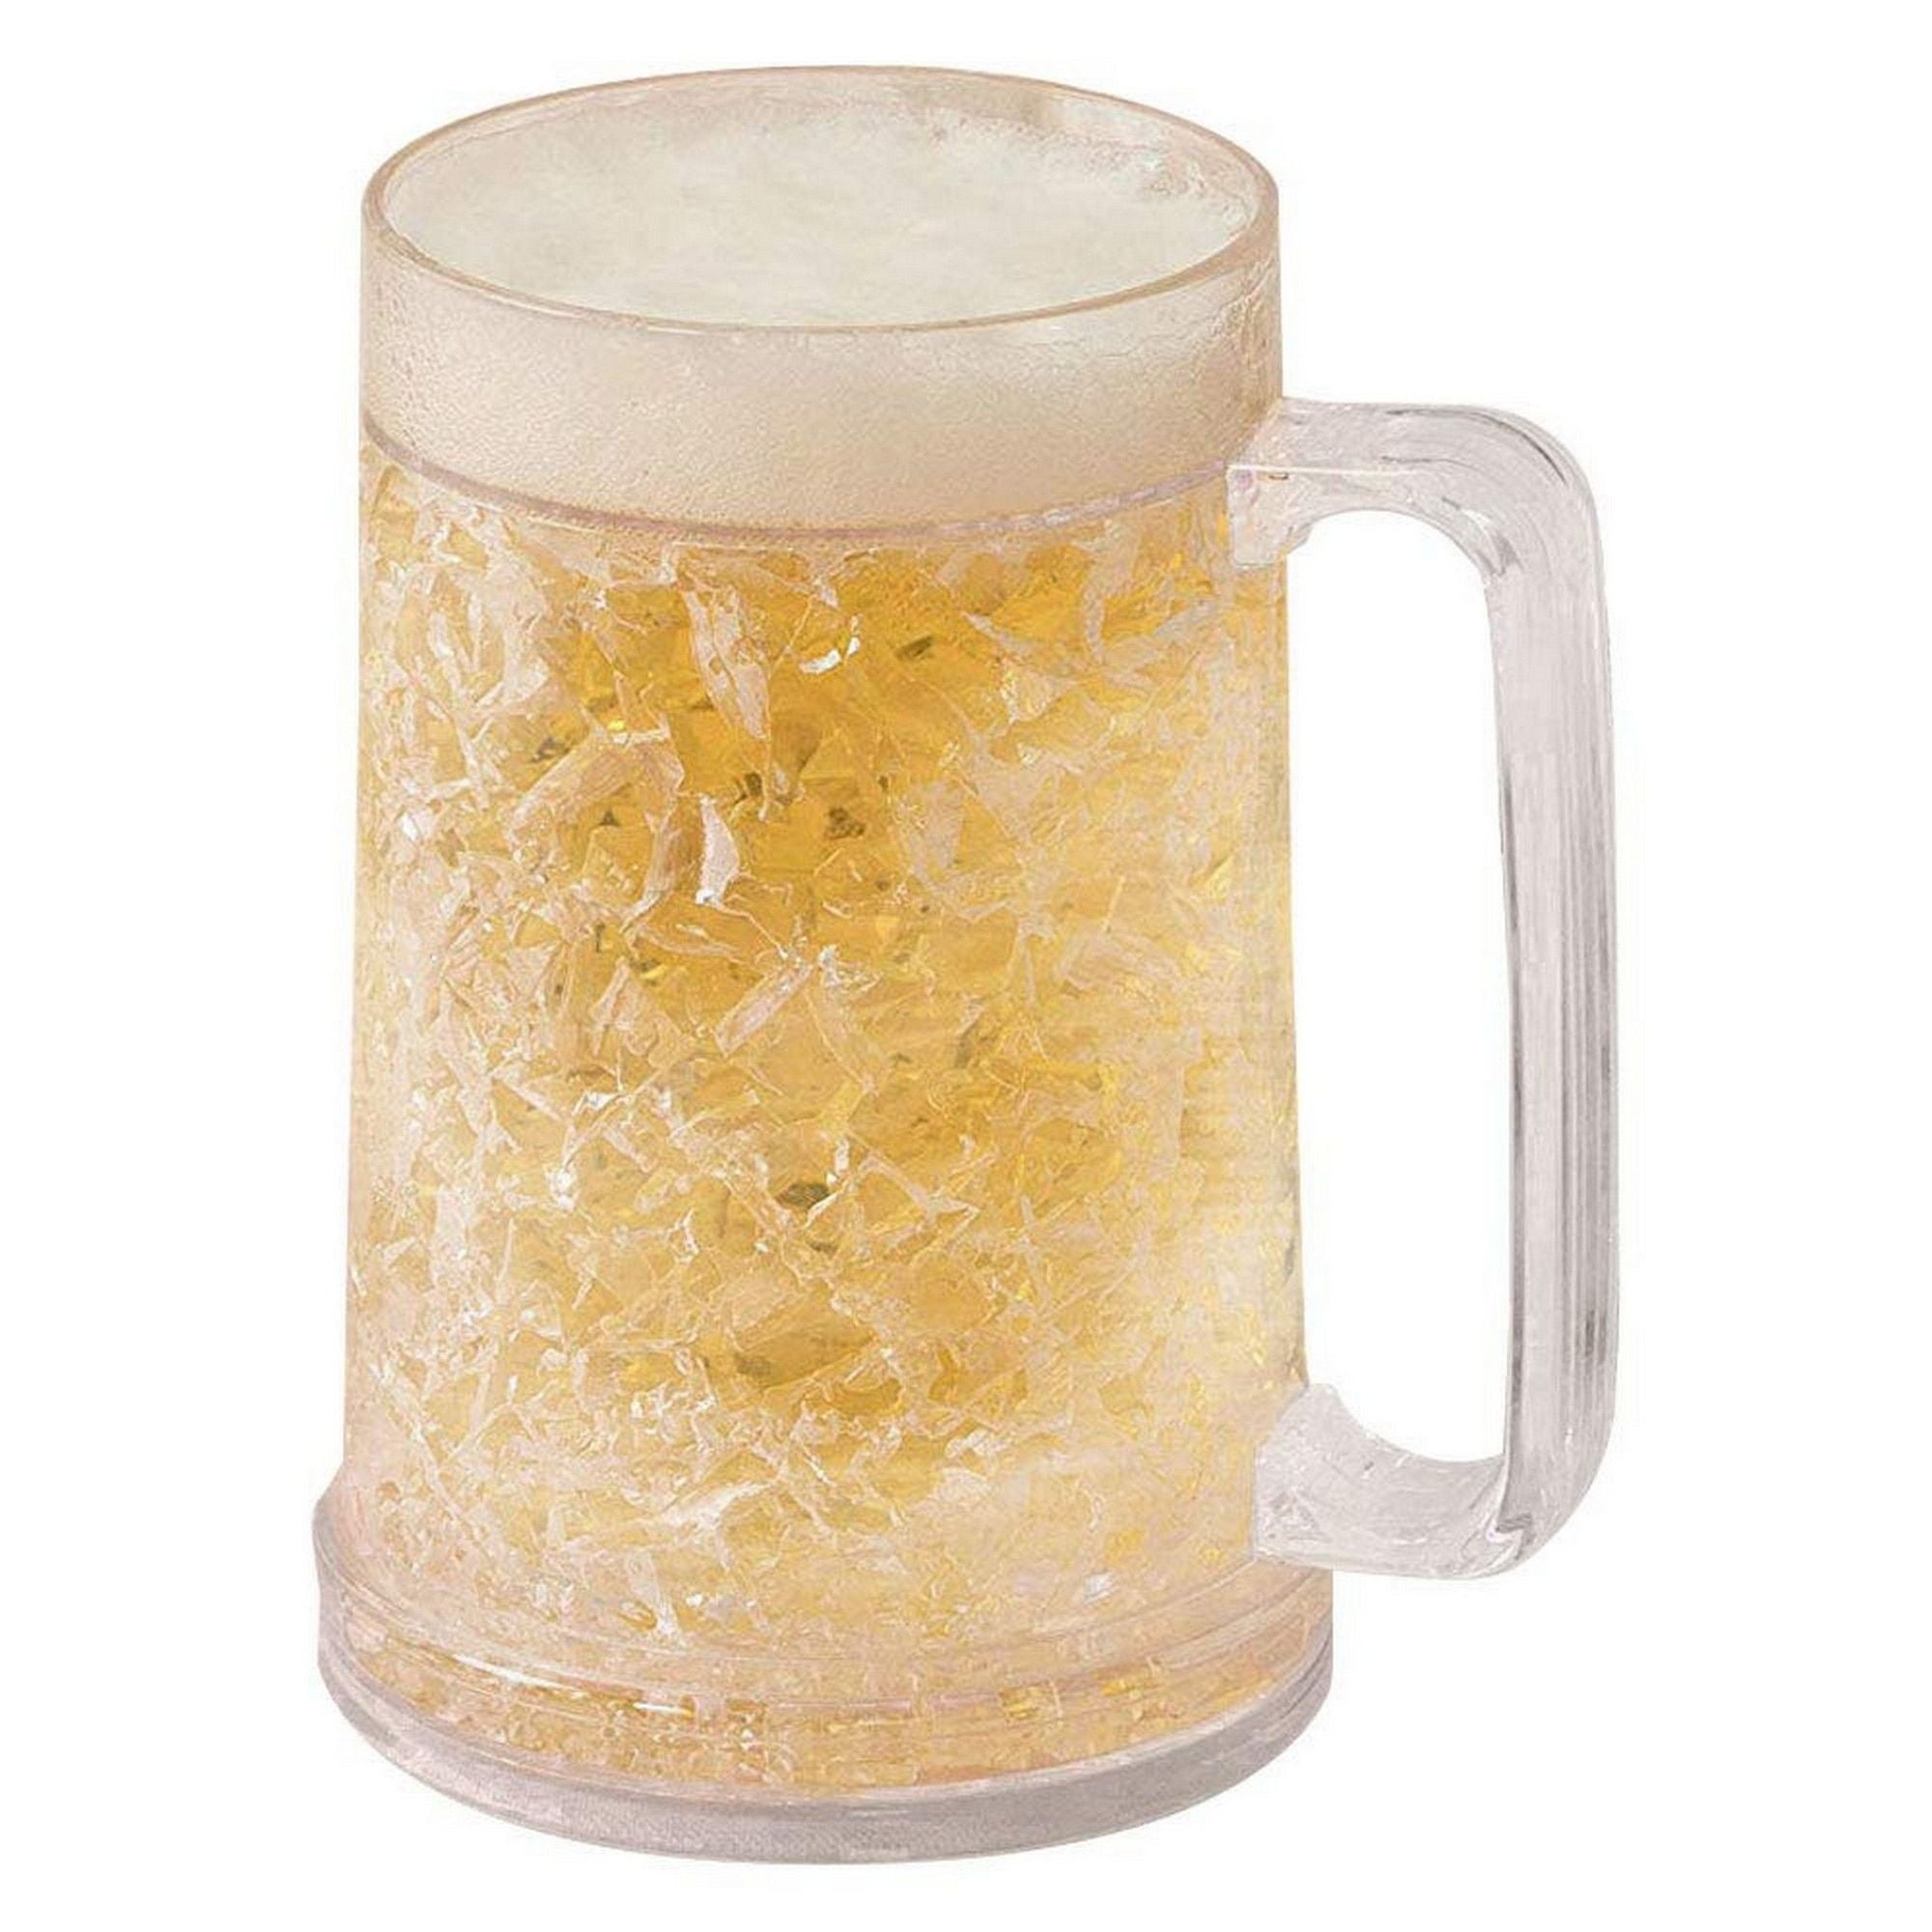 Download Double Wall Gel Freezer Mug - 4-Pack 16oz Frosty Beer Mugs with Handle, Shatterproof Drinking ...